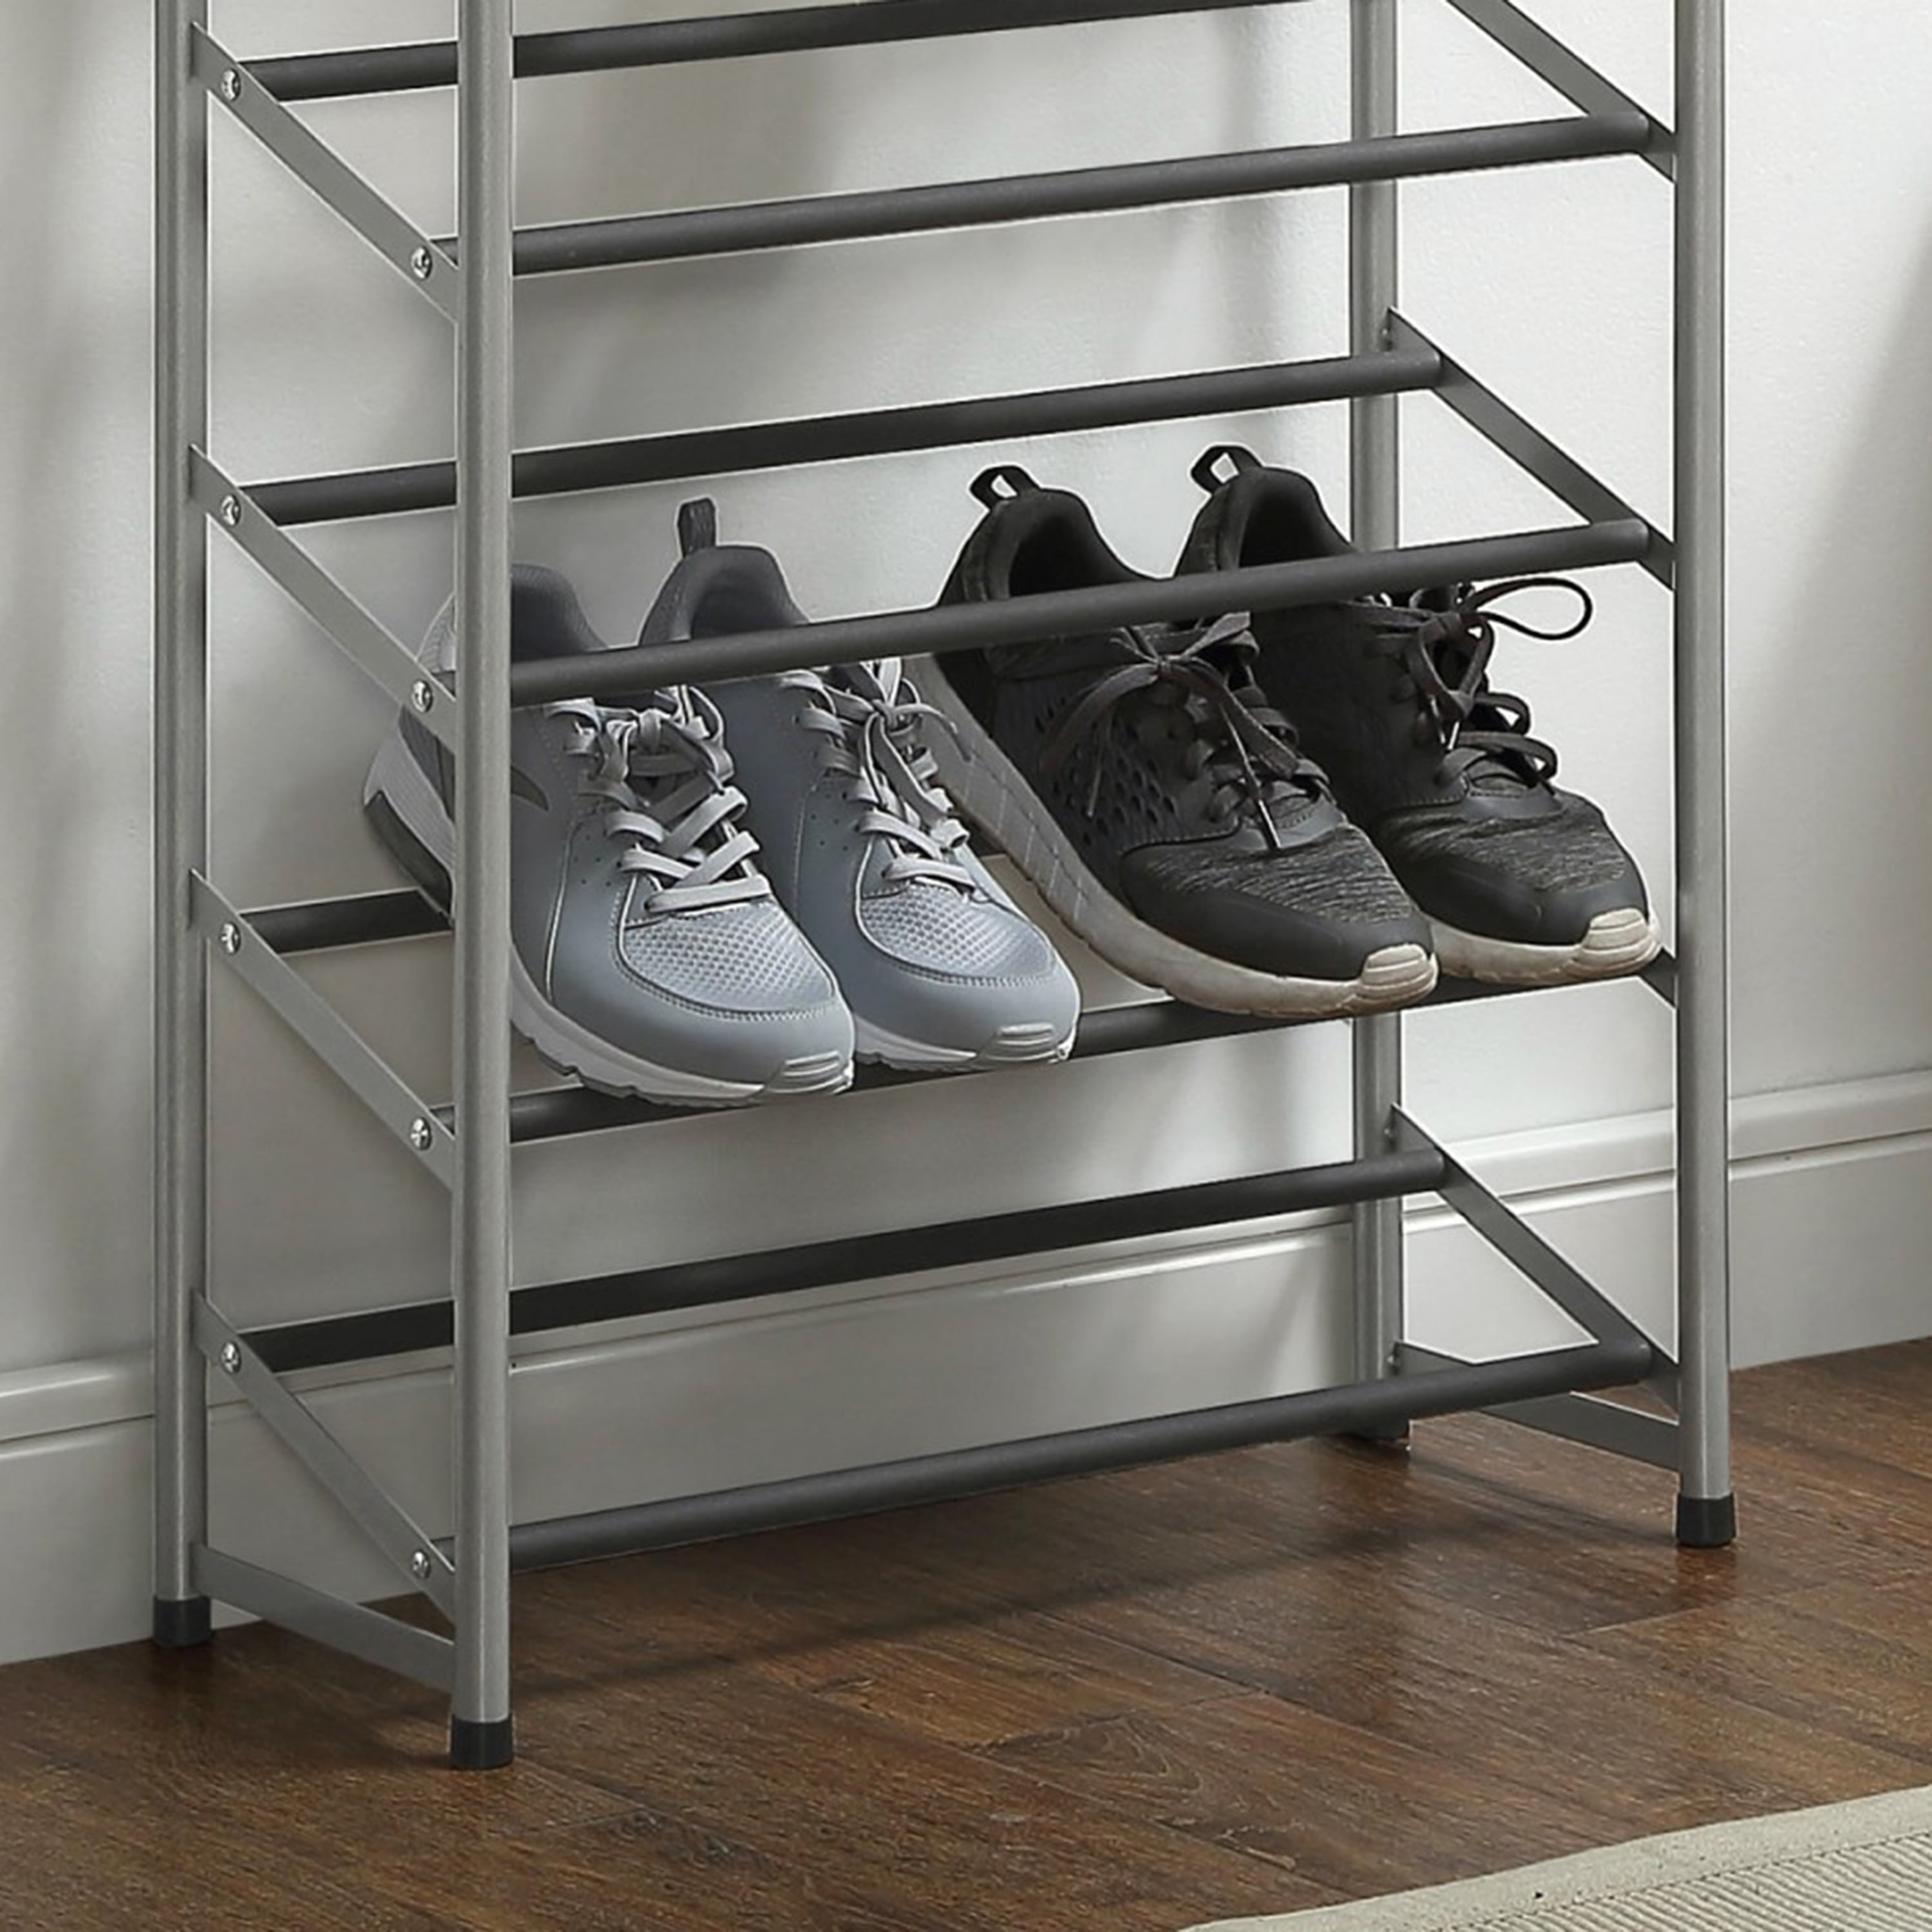 Shoes Rack Type Stackable Organizer Metal Frame 10 Tier Narrow Free Standing 